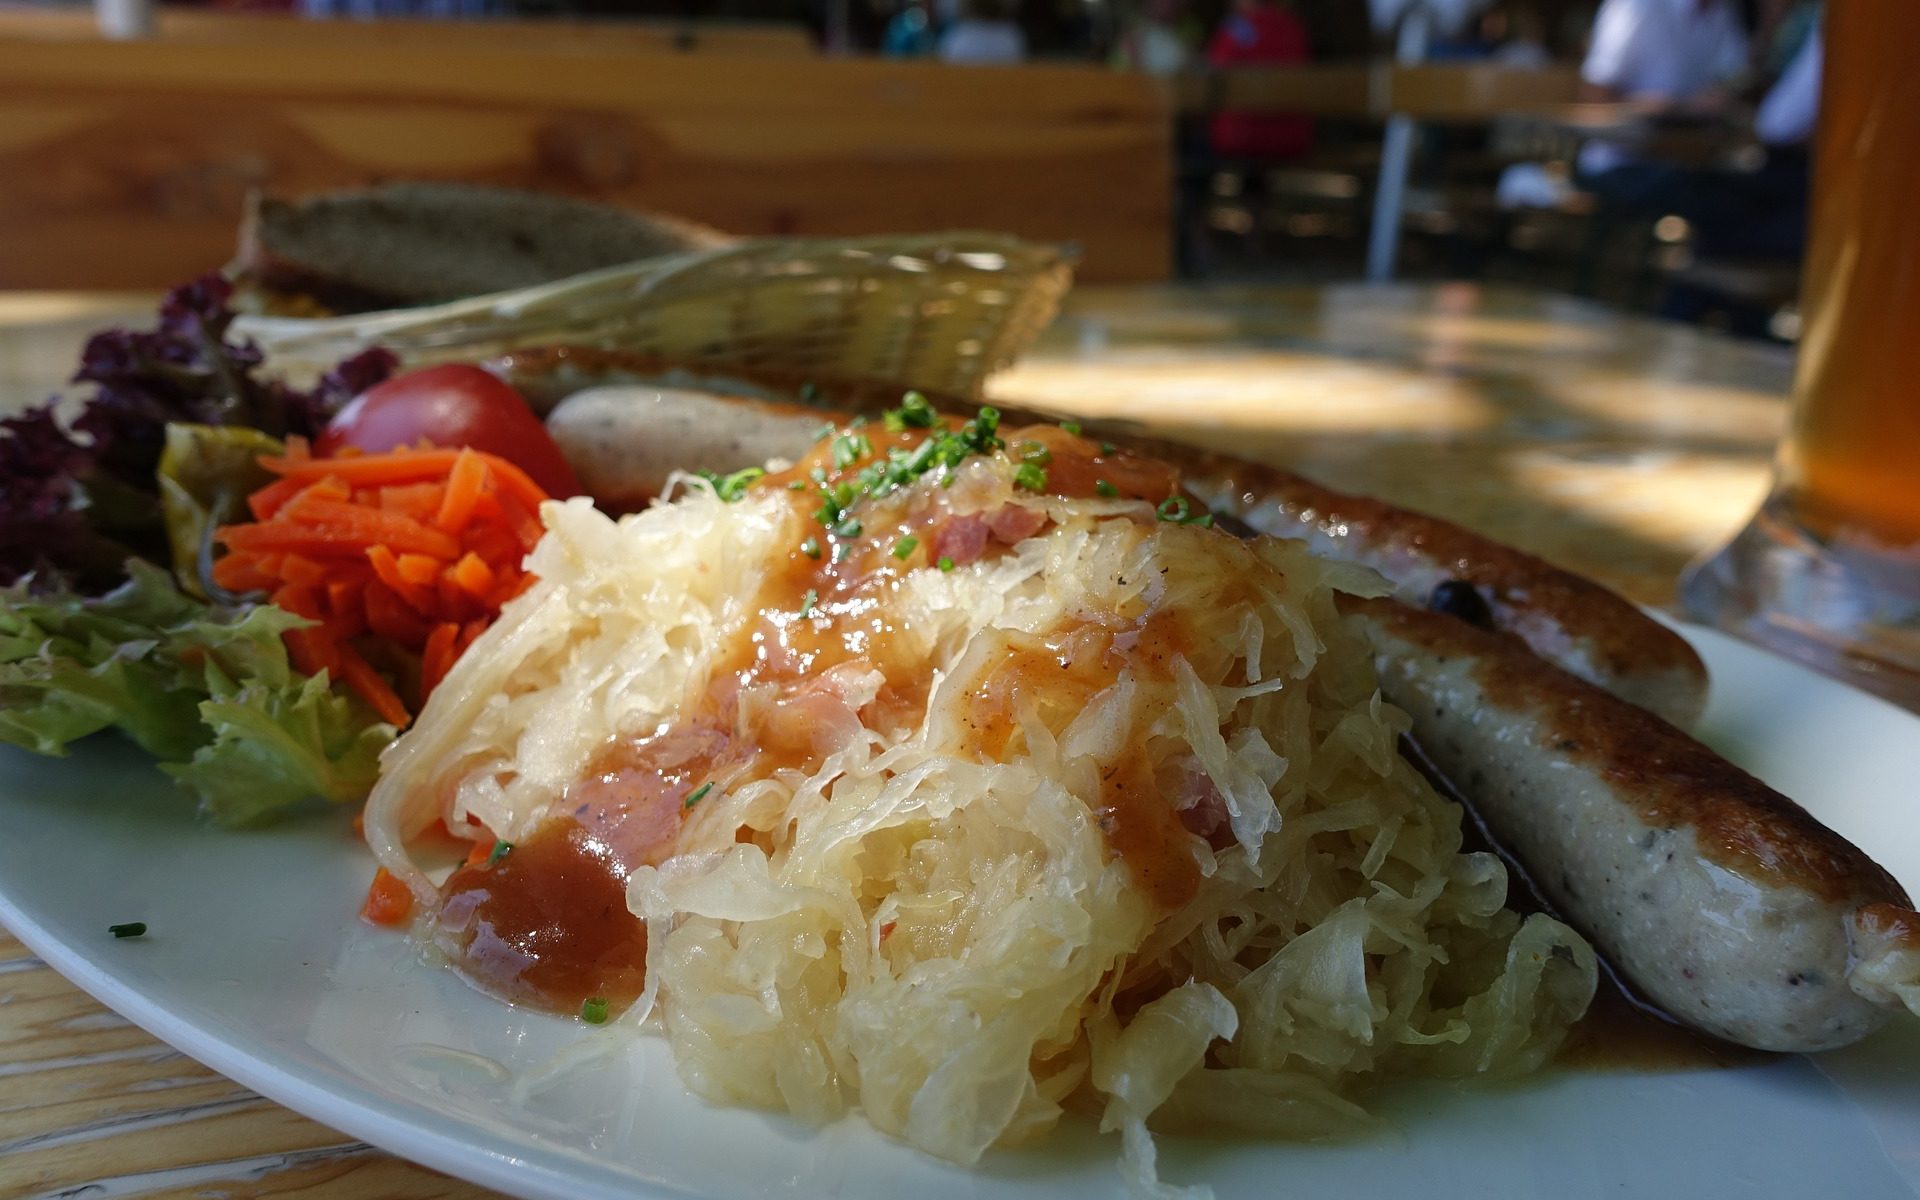 Eat: German Food for Americans in München